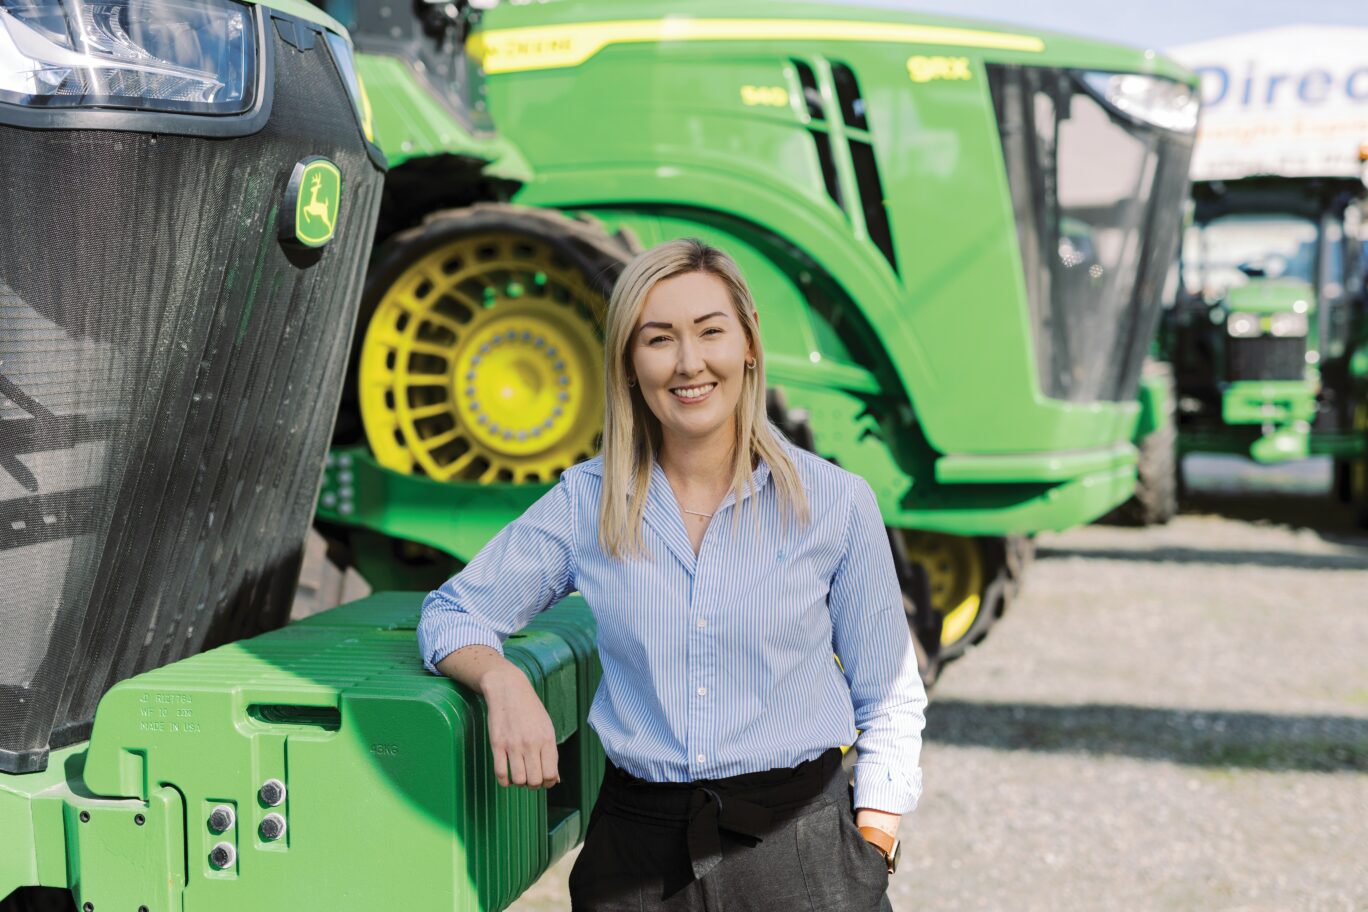 John Deere's Steph Gersekowski who is the Production System Manager